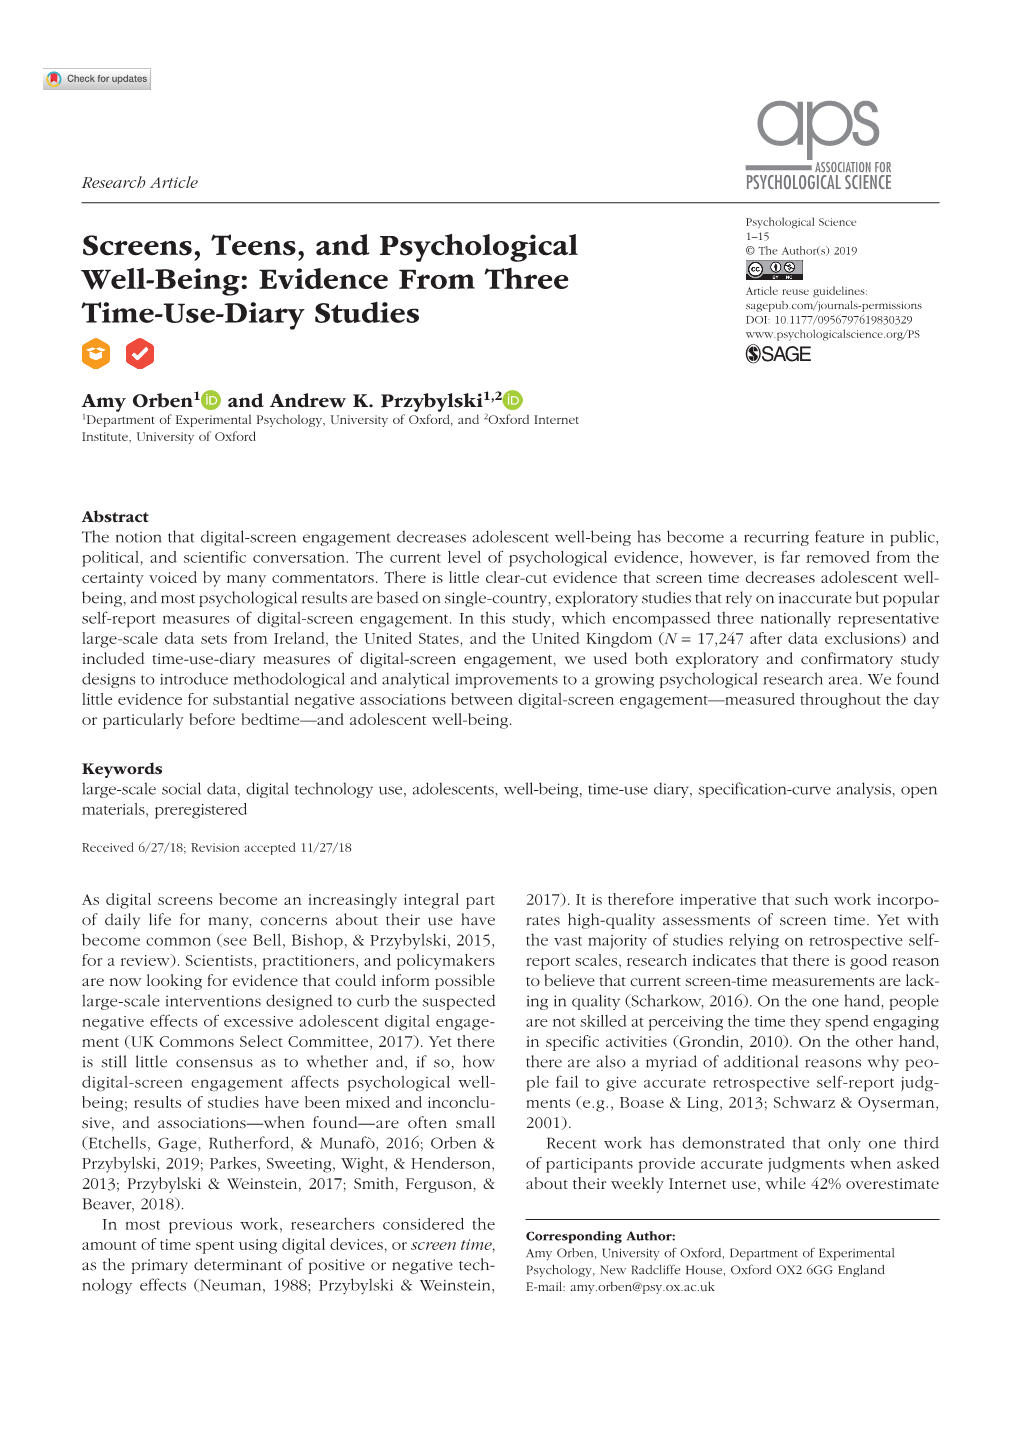 Screens, Teens, and Psychological Well-Being 830329Research-Article2019